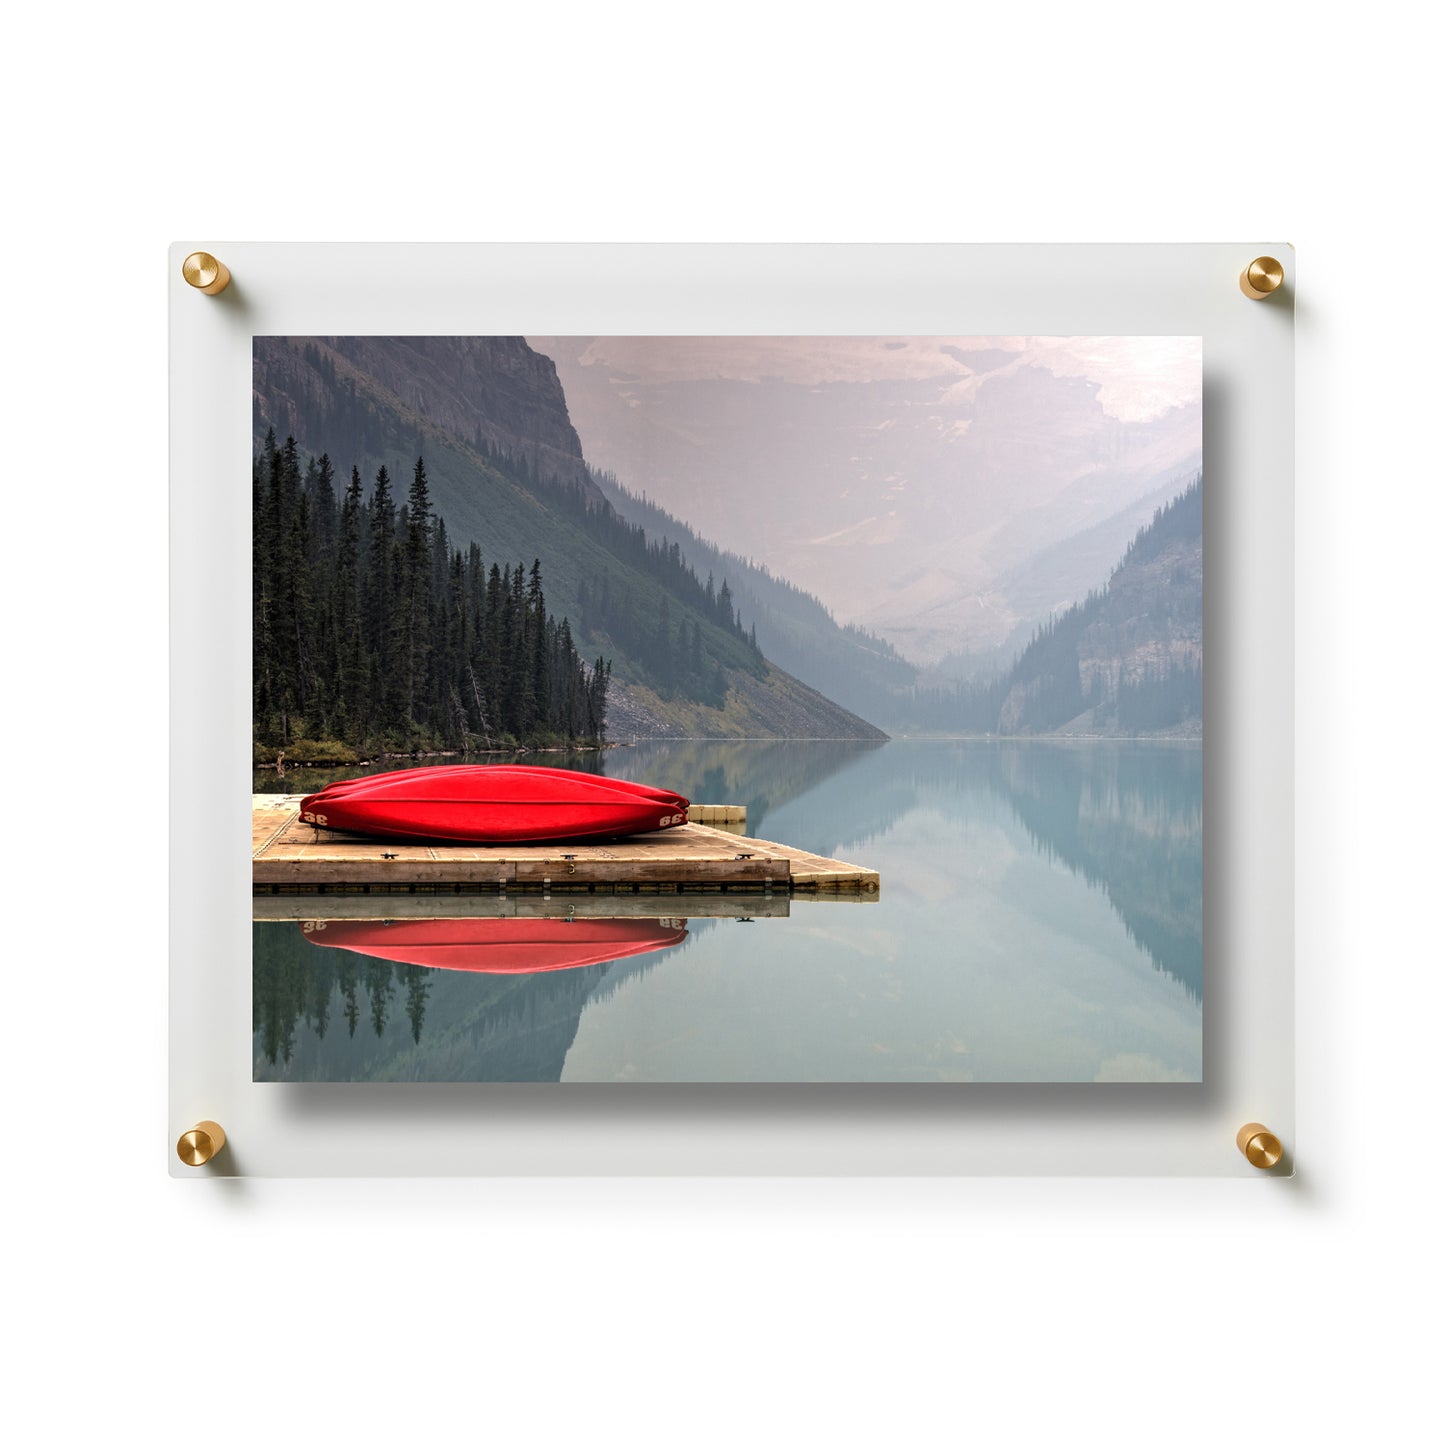 11x14" Photo Floating Acrylic Clear Picture Frame (Frame Size 15x18")